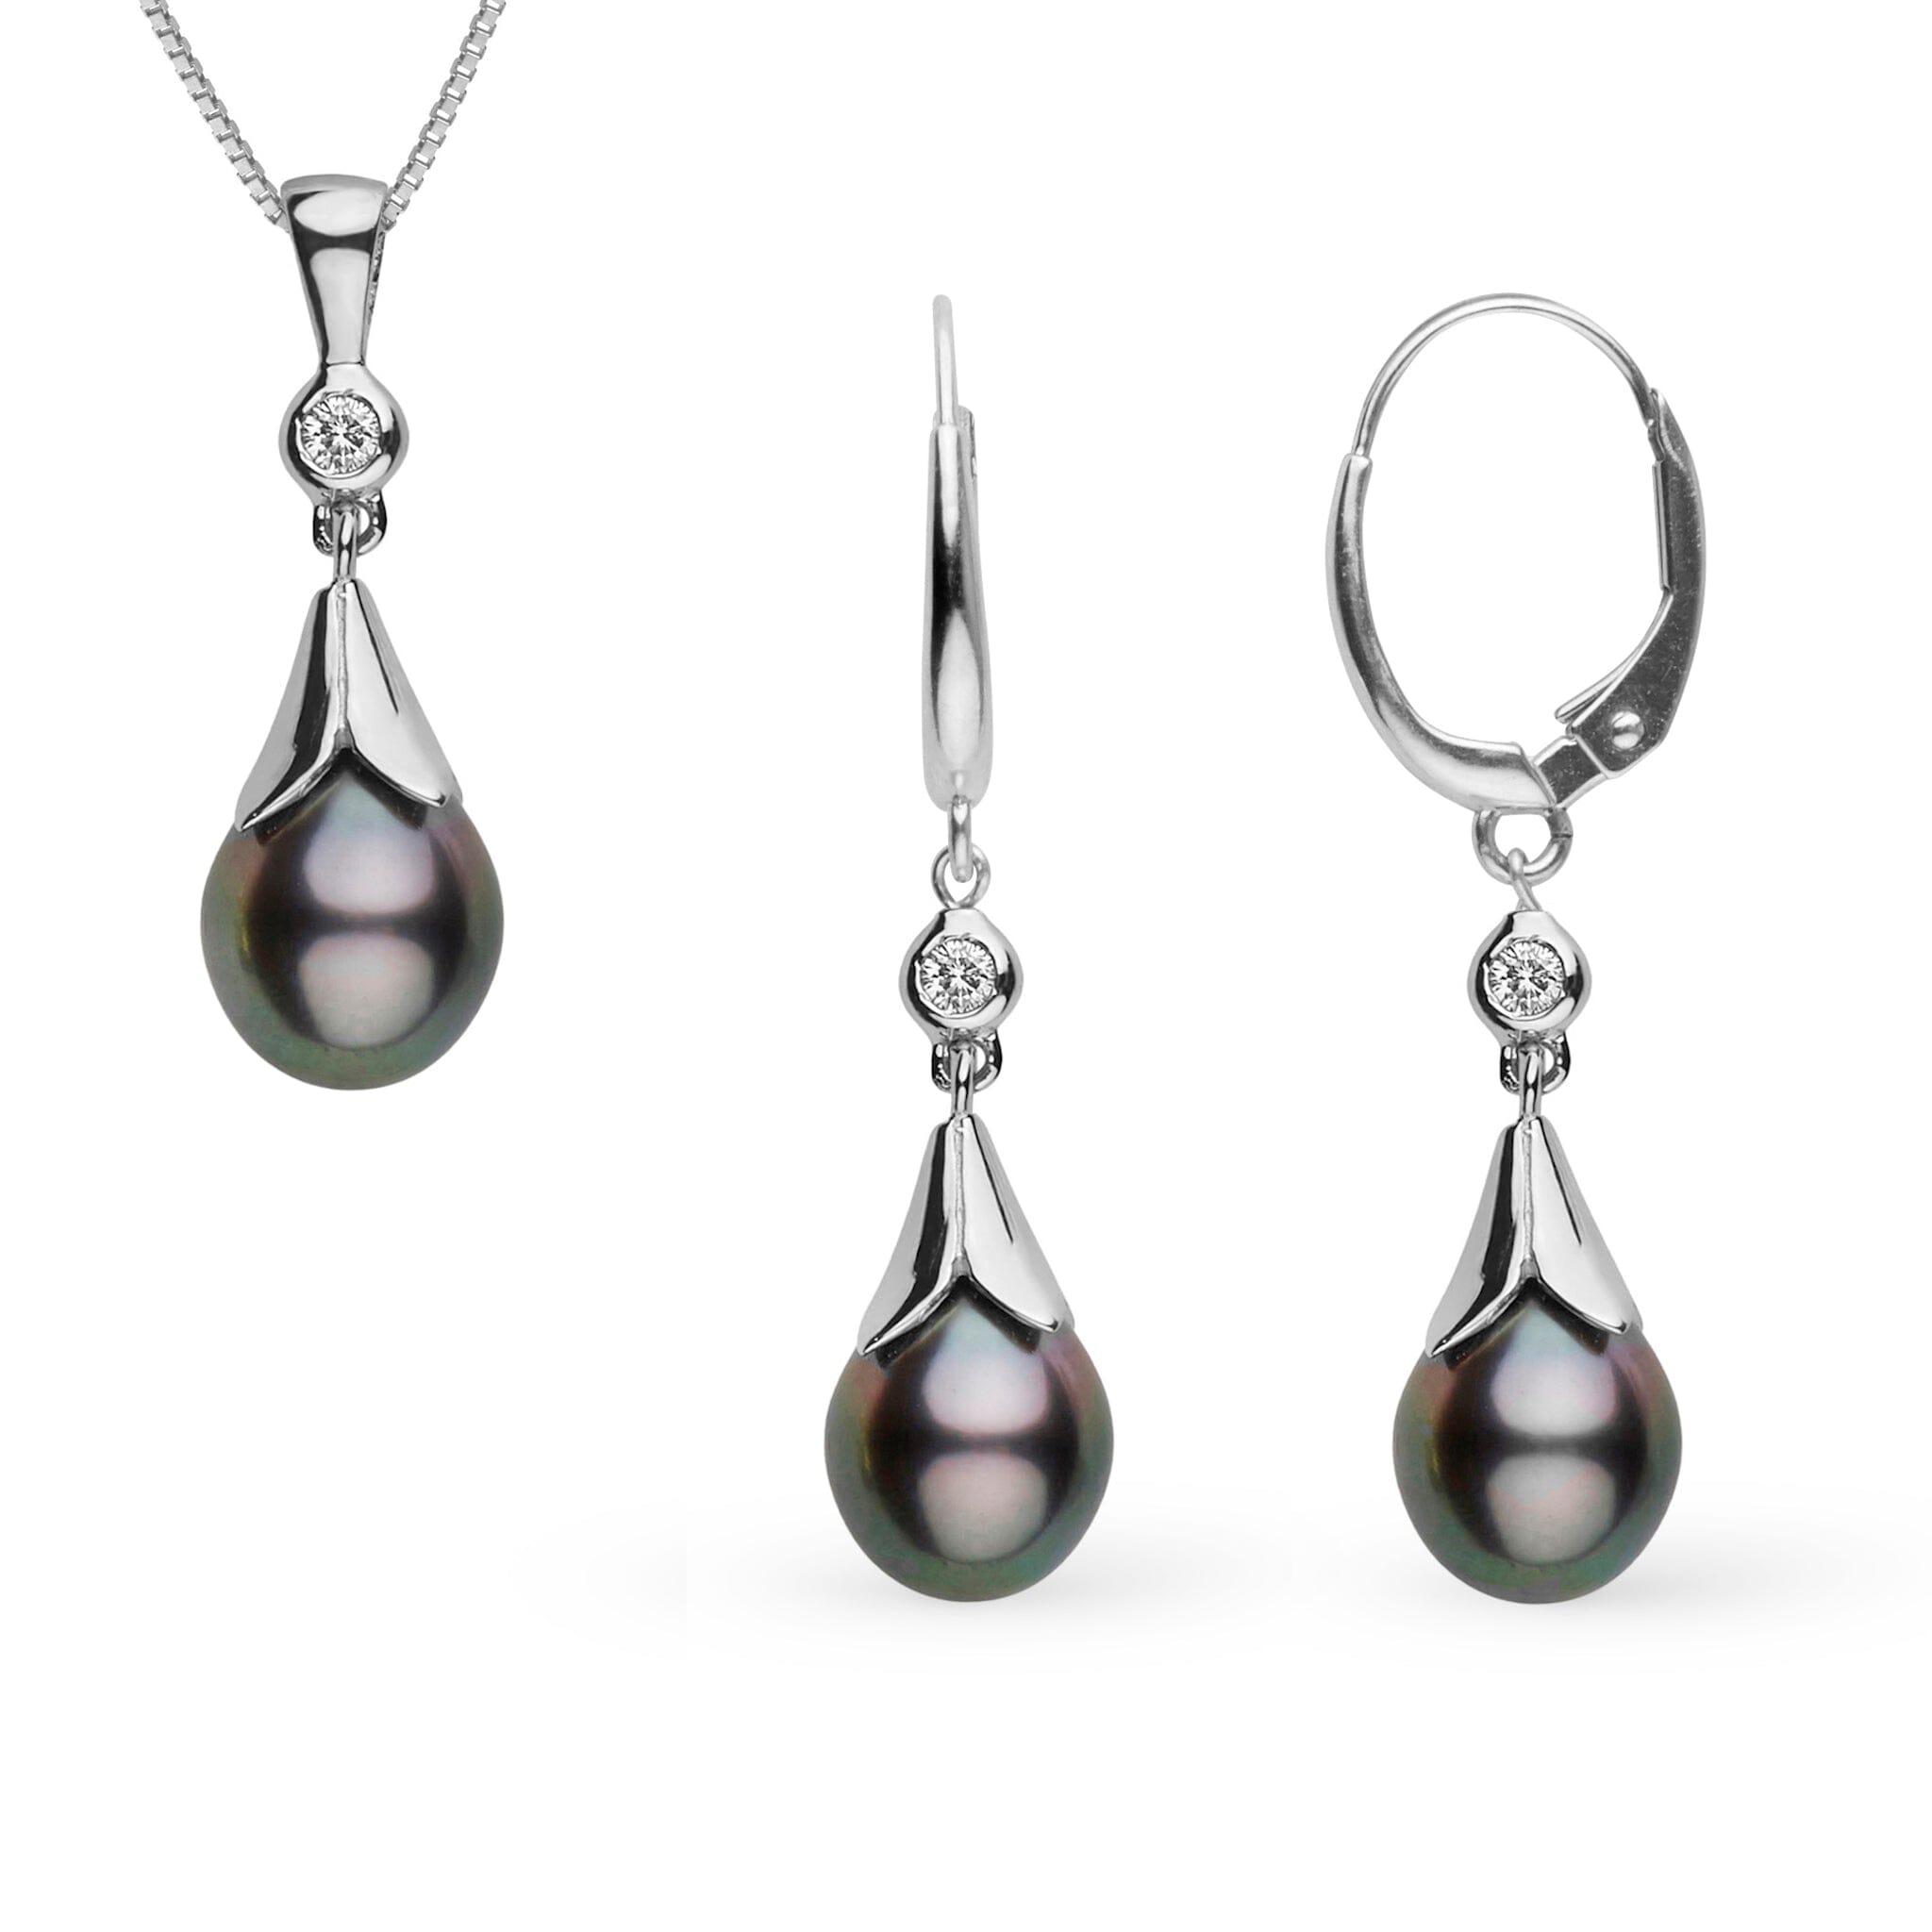 Lilium Collection 9.0-10.0 mm Tahitian Drop Pearl and Diamond Pendant and Earrings Set